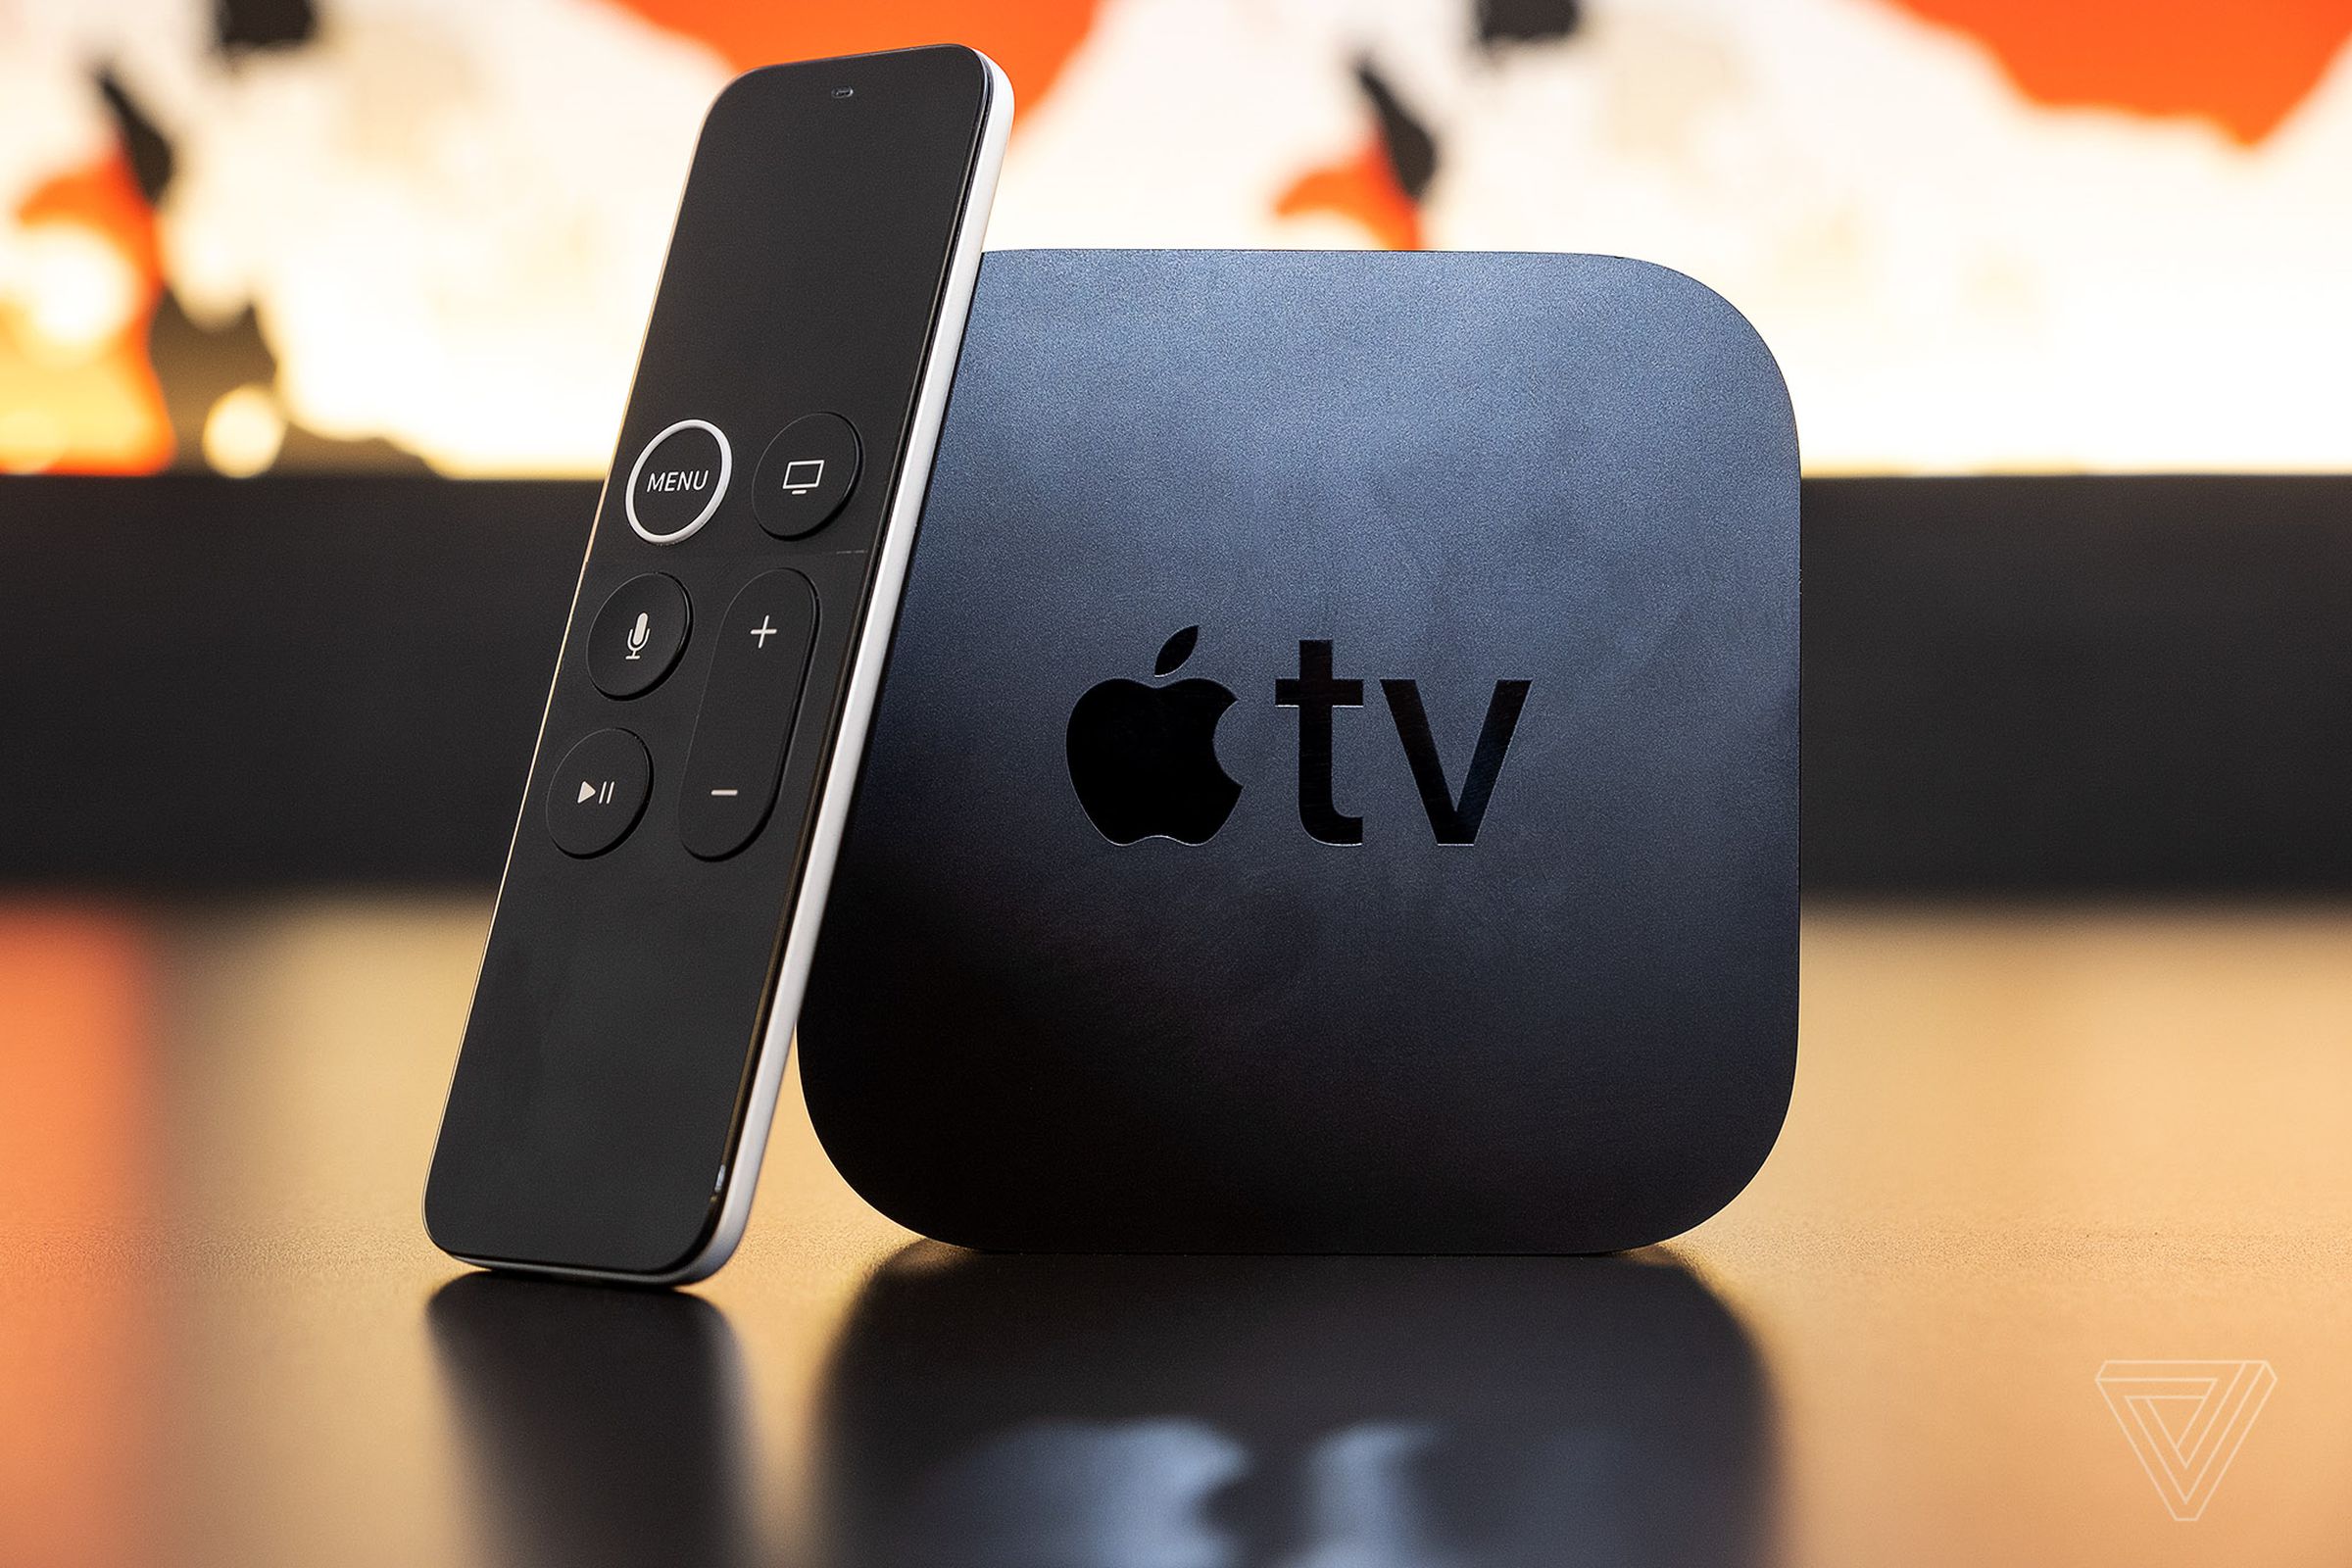 The Apple TV 4K, the best streaming device user experience, on a table with the Siri remote.